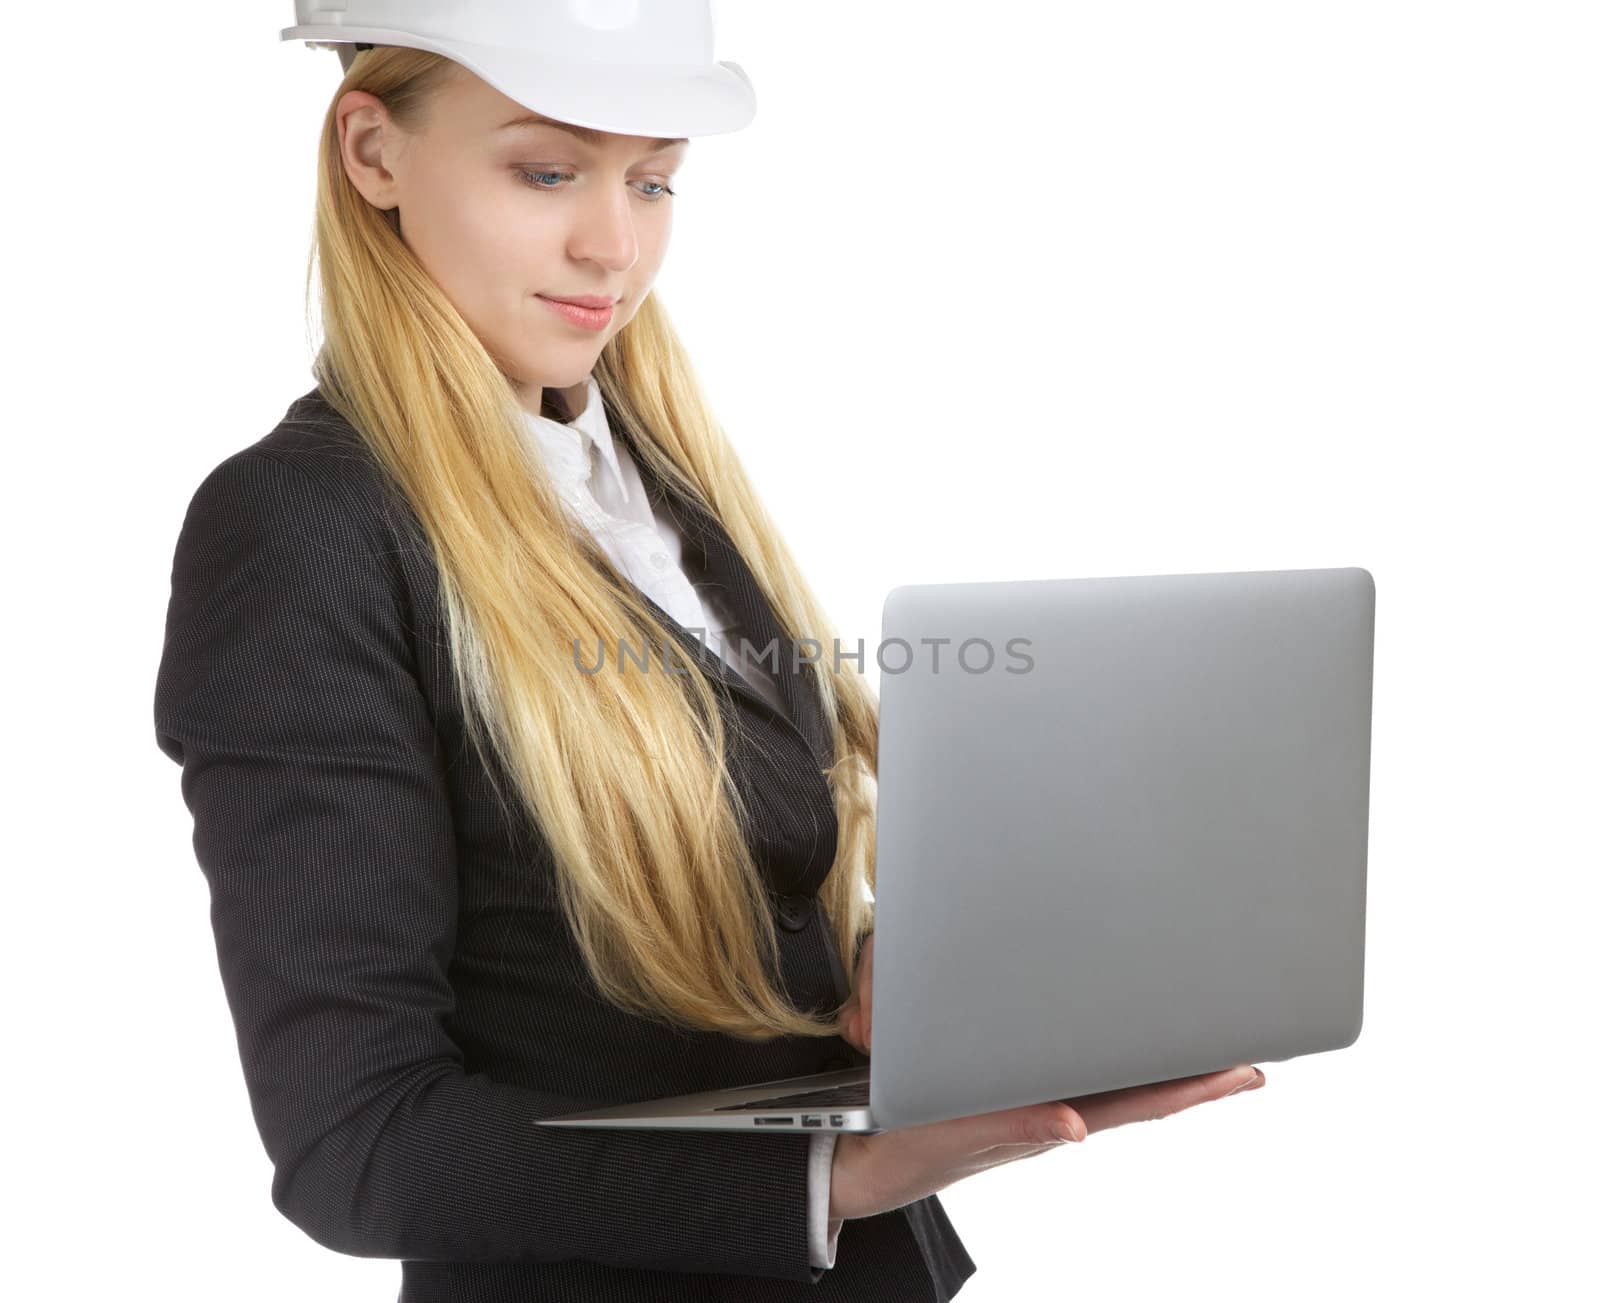 engineer woman with laptop, isolated on white